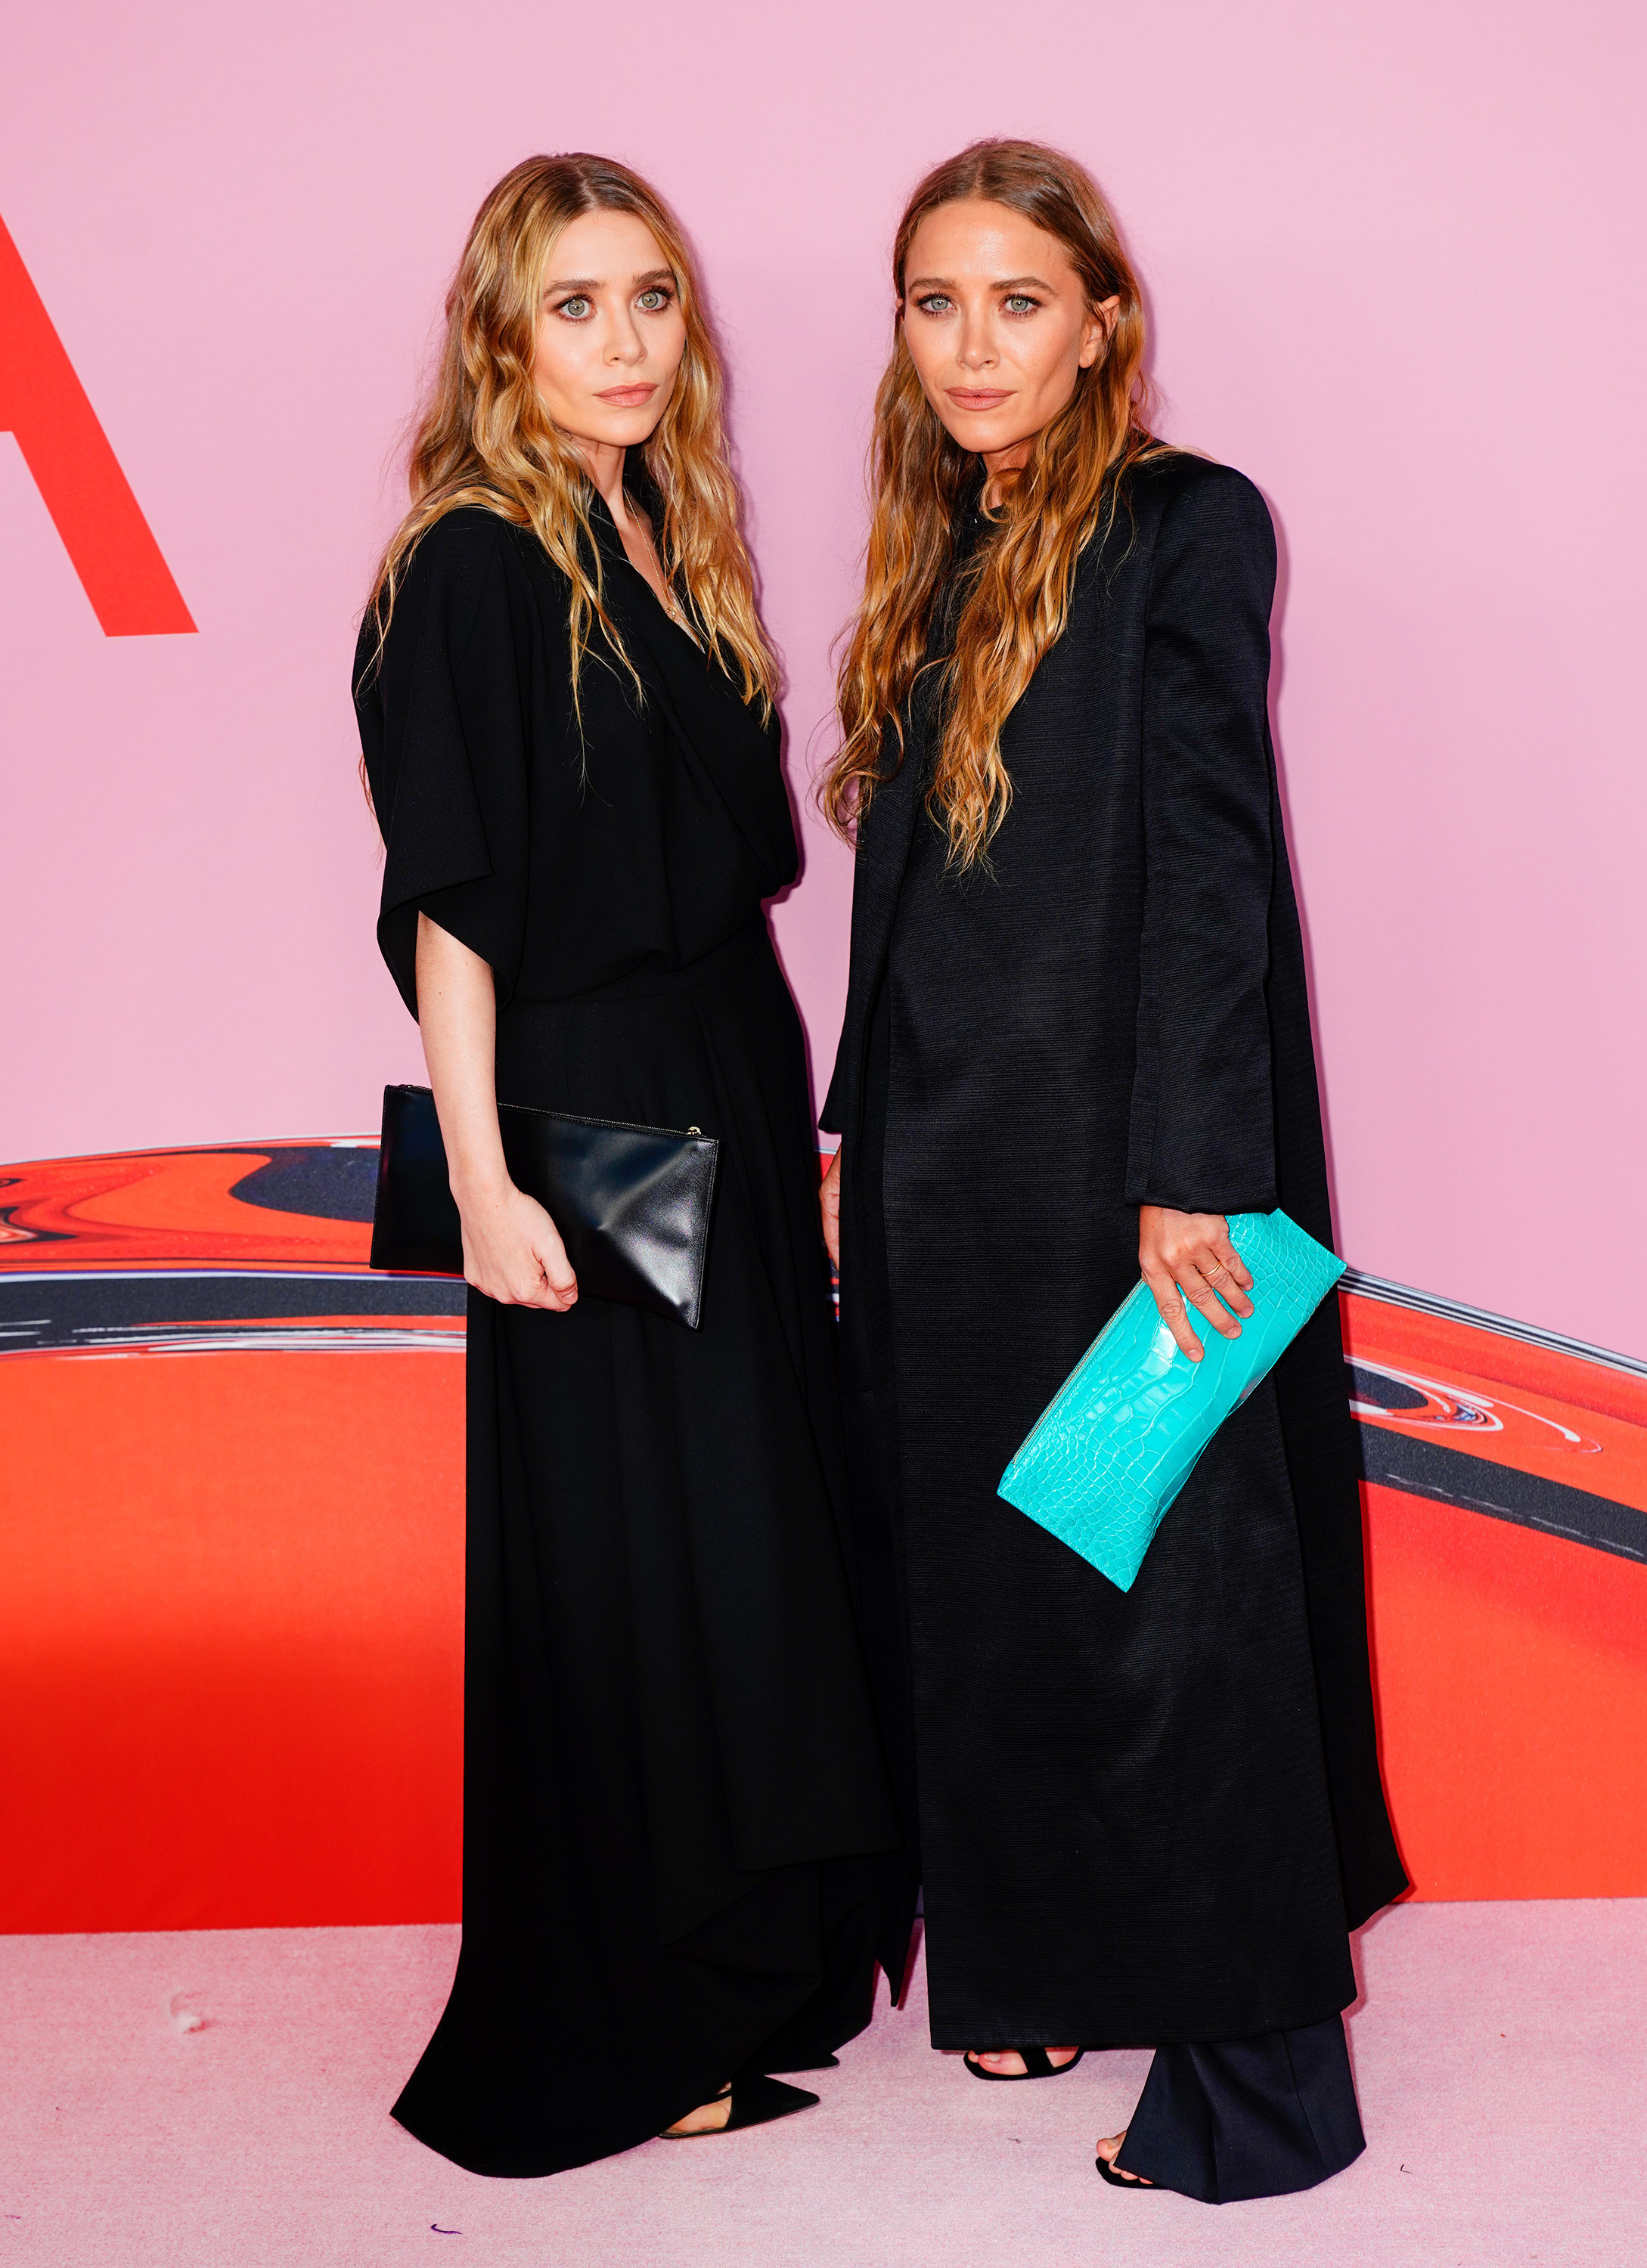 Mary-Kate and Ashley both wear billowy, long, dark colored dresses with sandals. Mary-Kate holds a bright colored snakeskin clutch while Ashley holds a black one.